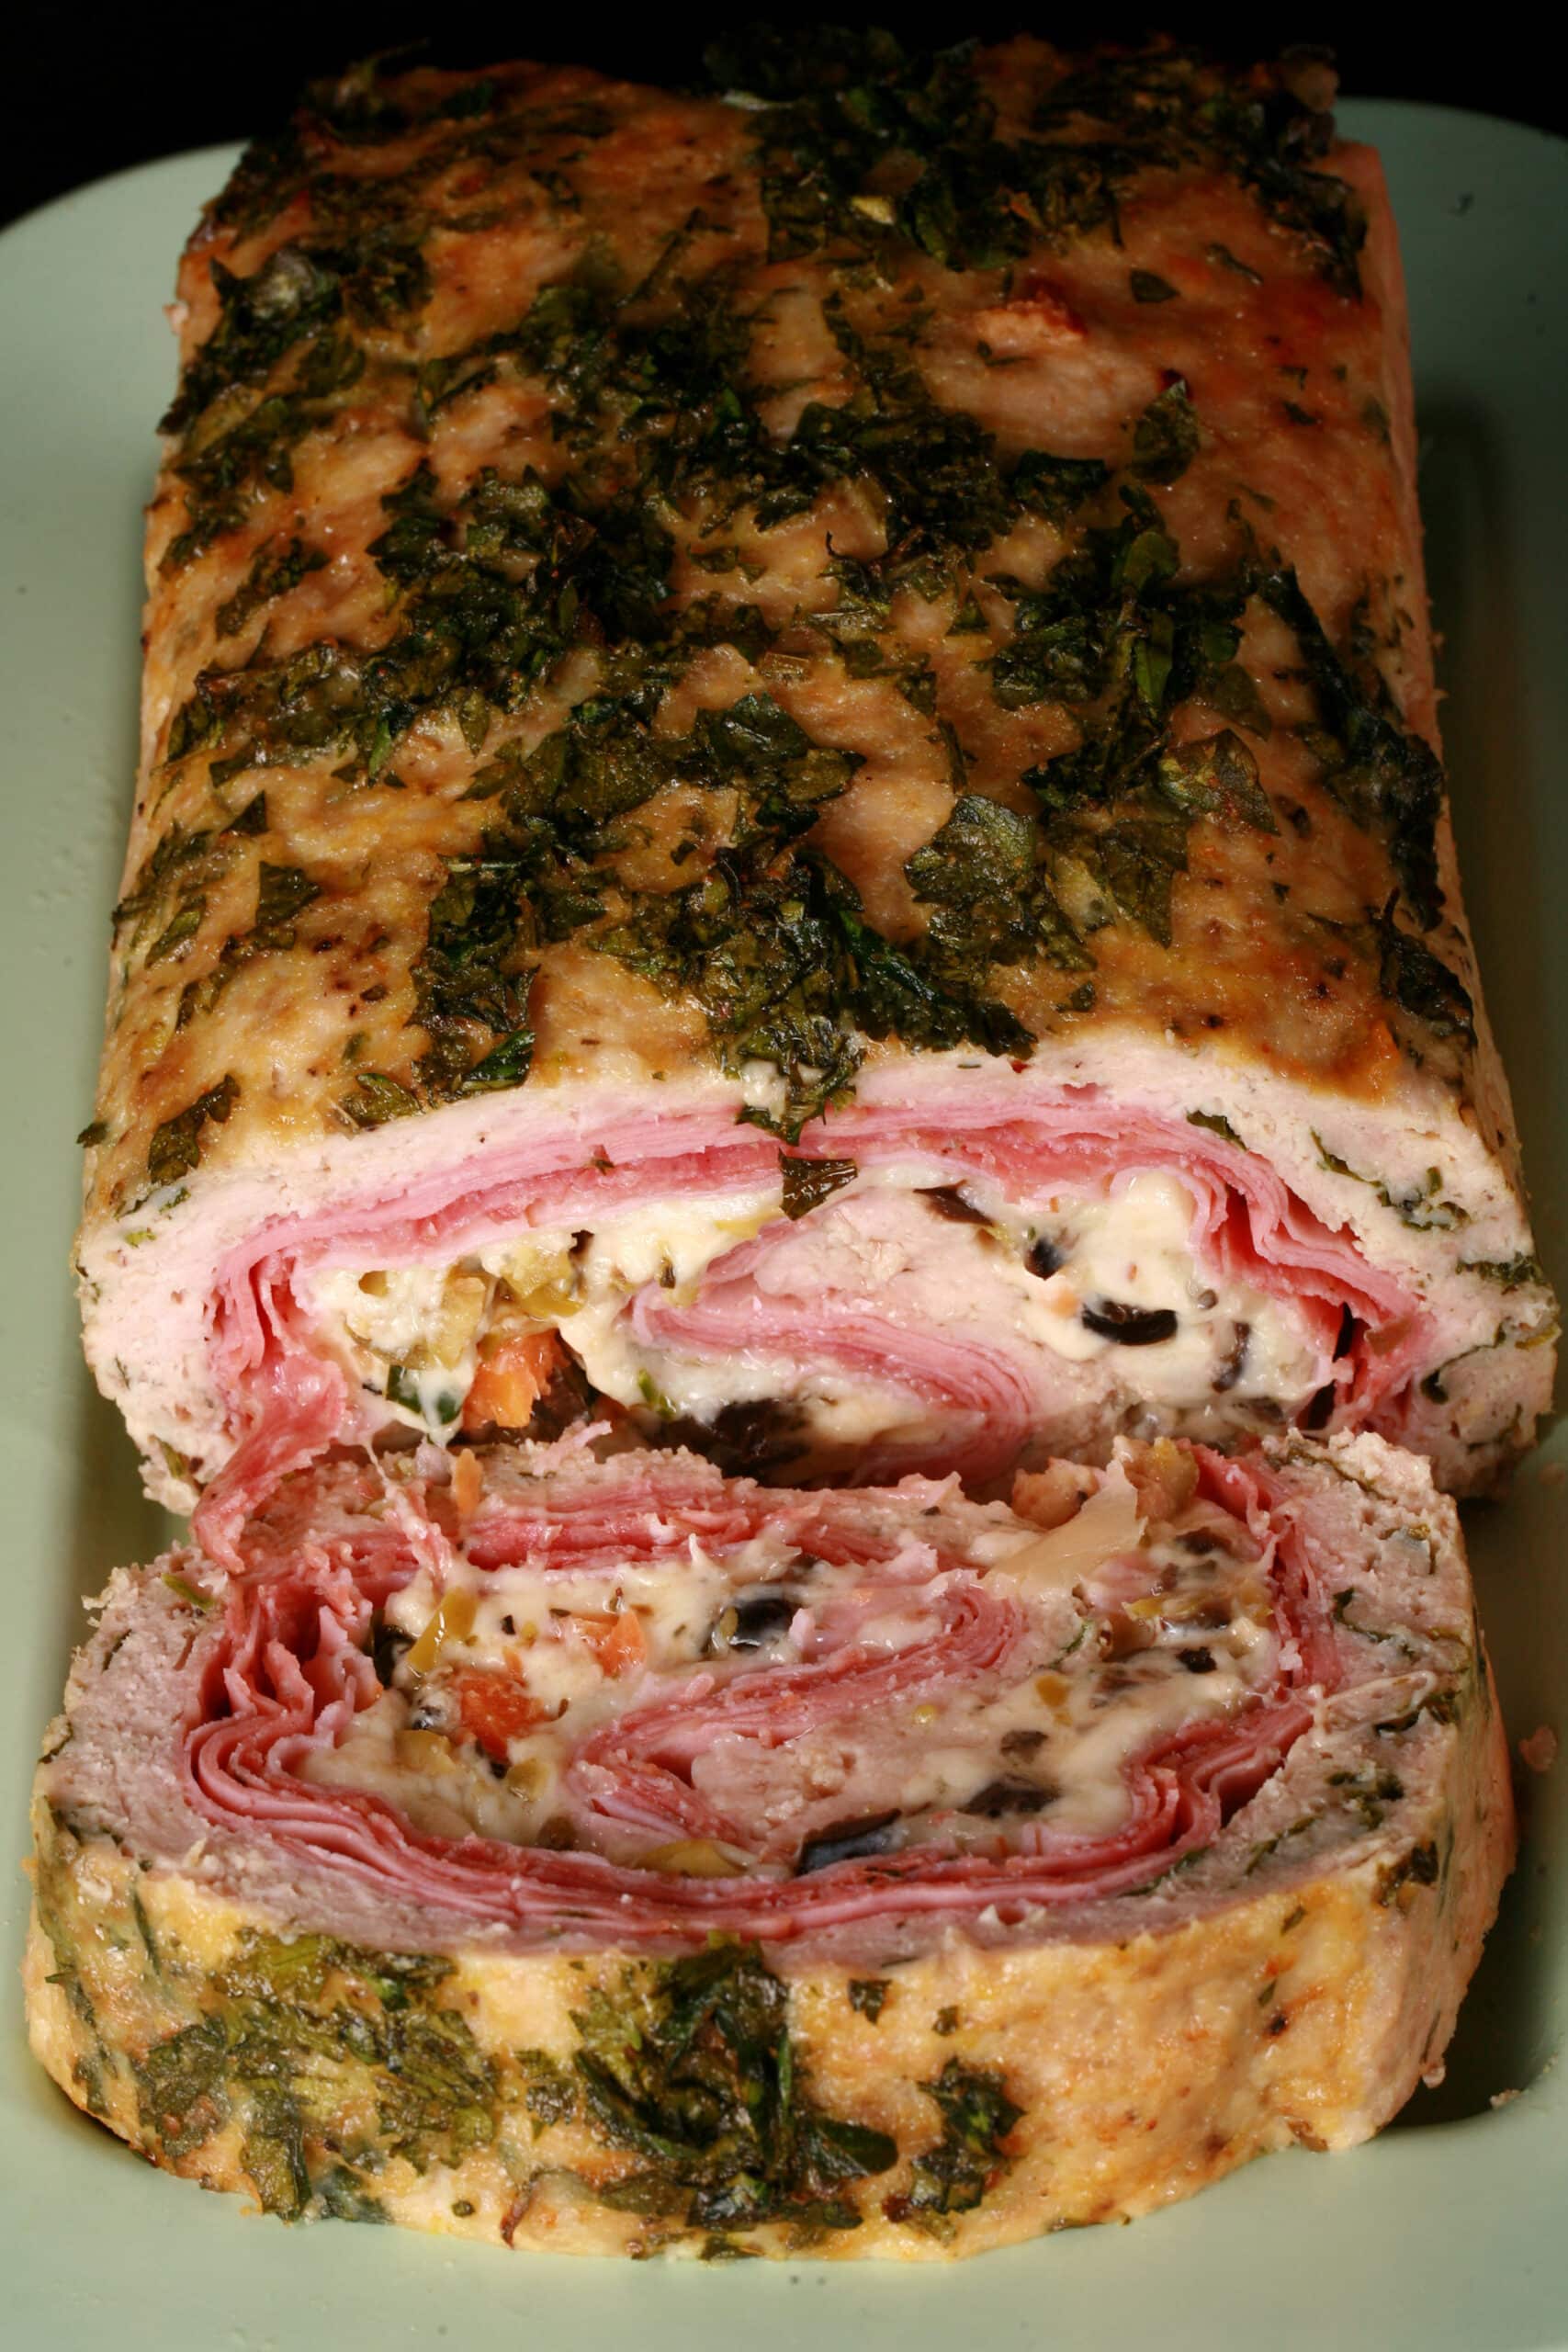 A close up view of a muffaletta stuffed meatloaf.